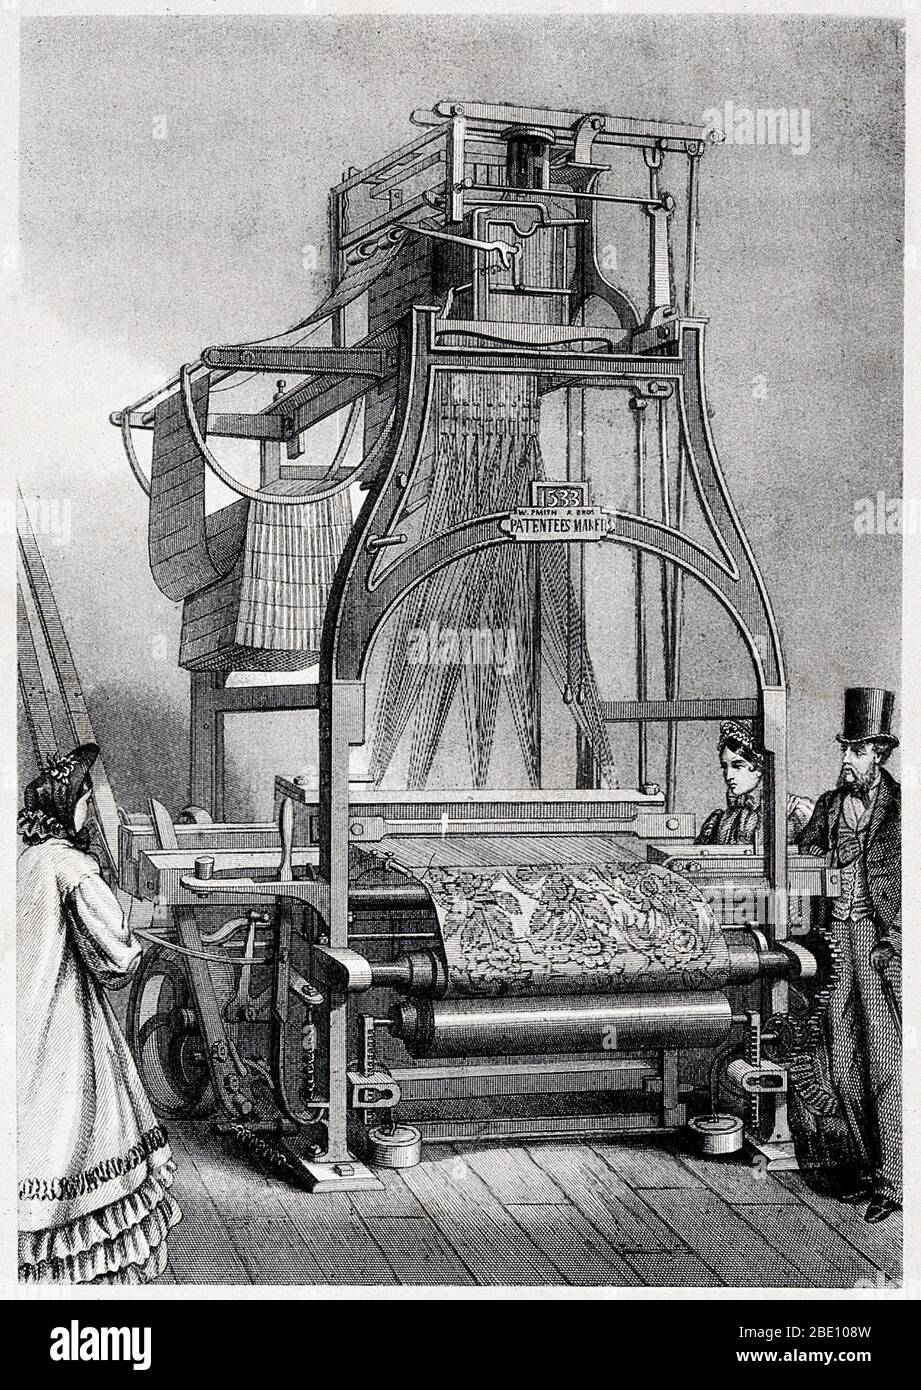 A mechanical Jacquard loom, front and rear elevations. Engraving by Pegard after L. Guiguet. This device for weaving textiles was invented in 1804 by the French weaver and inventor Joseph Marie Jacquard (1752-1834). It had a number of novel design features and was the first to be automatically controlled. It was controlled by a number of perforated cards, the holes corresponding to the weave pattern. When this was introduced into factories, there were riots among workers who feared losing their jobs. Stock Photo